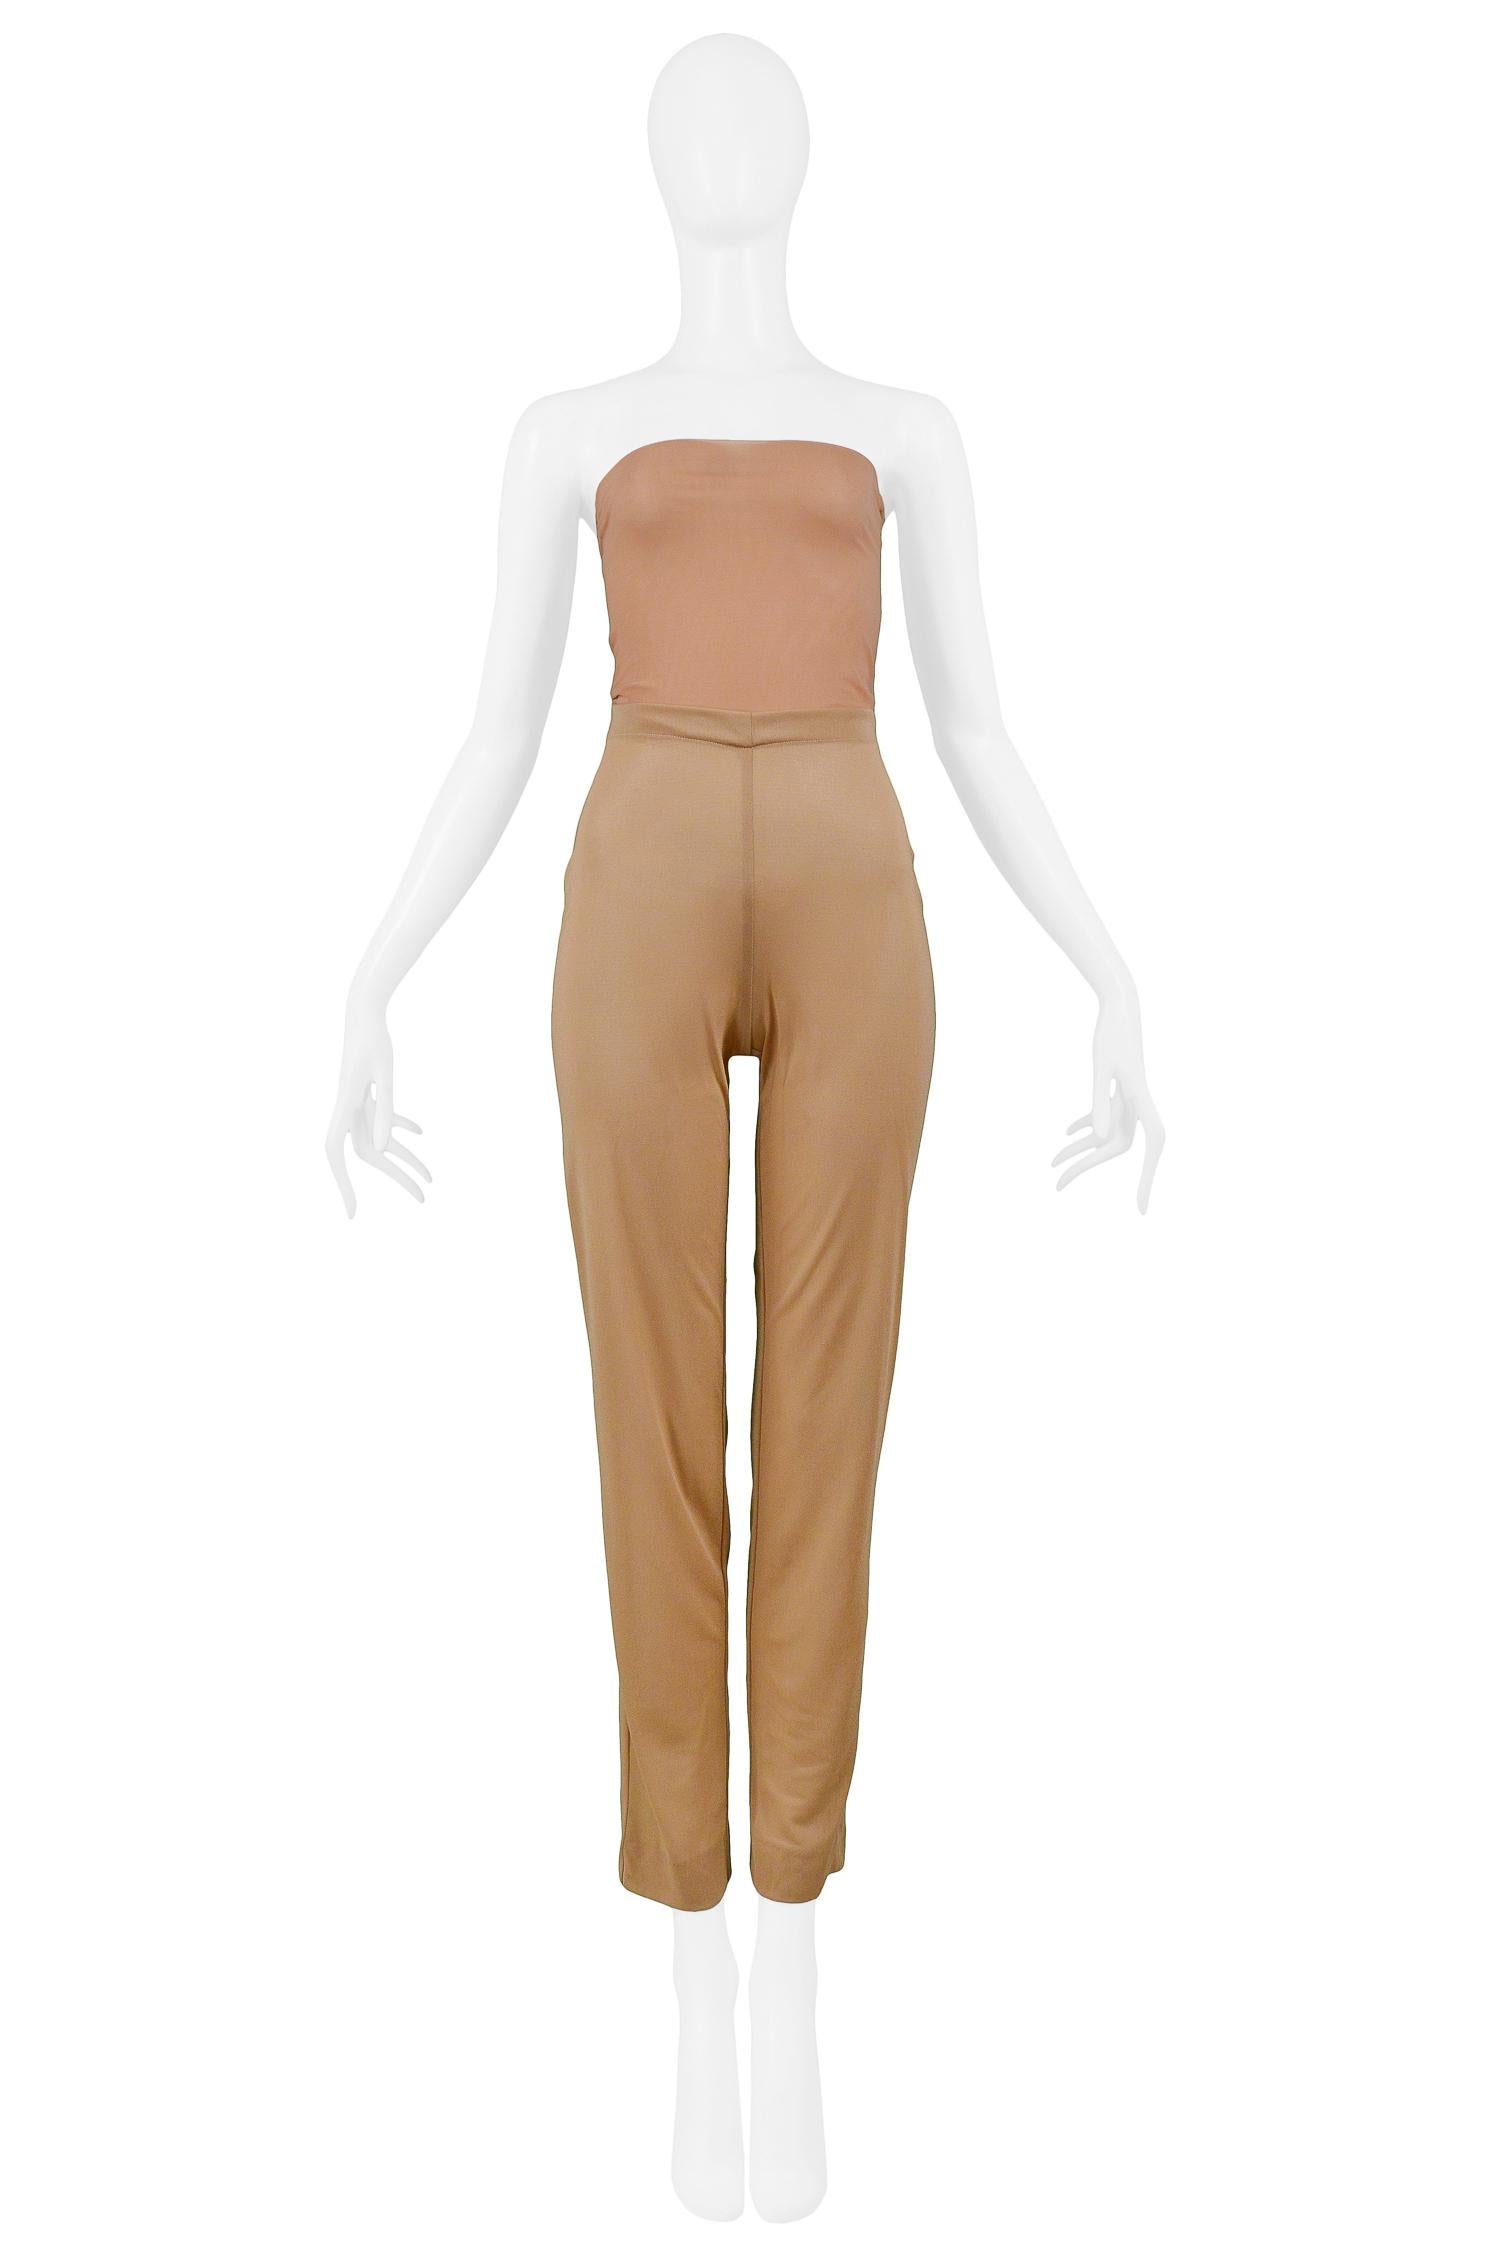 Vintage Helmut Lang nude tonal double mesh high waisted pants with attached fabric that can be folded over at waist or worn over bust.

Excellent Vintage Condition.

Size 42